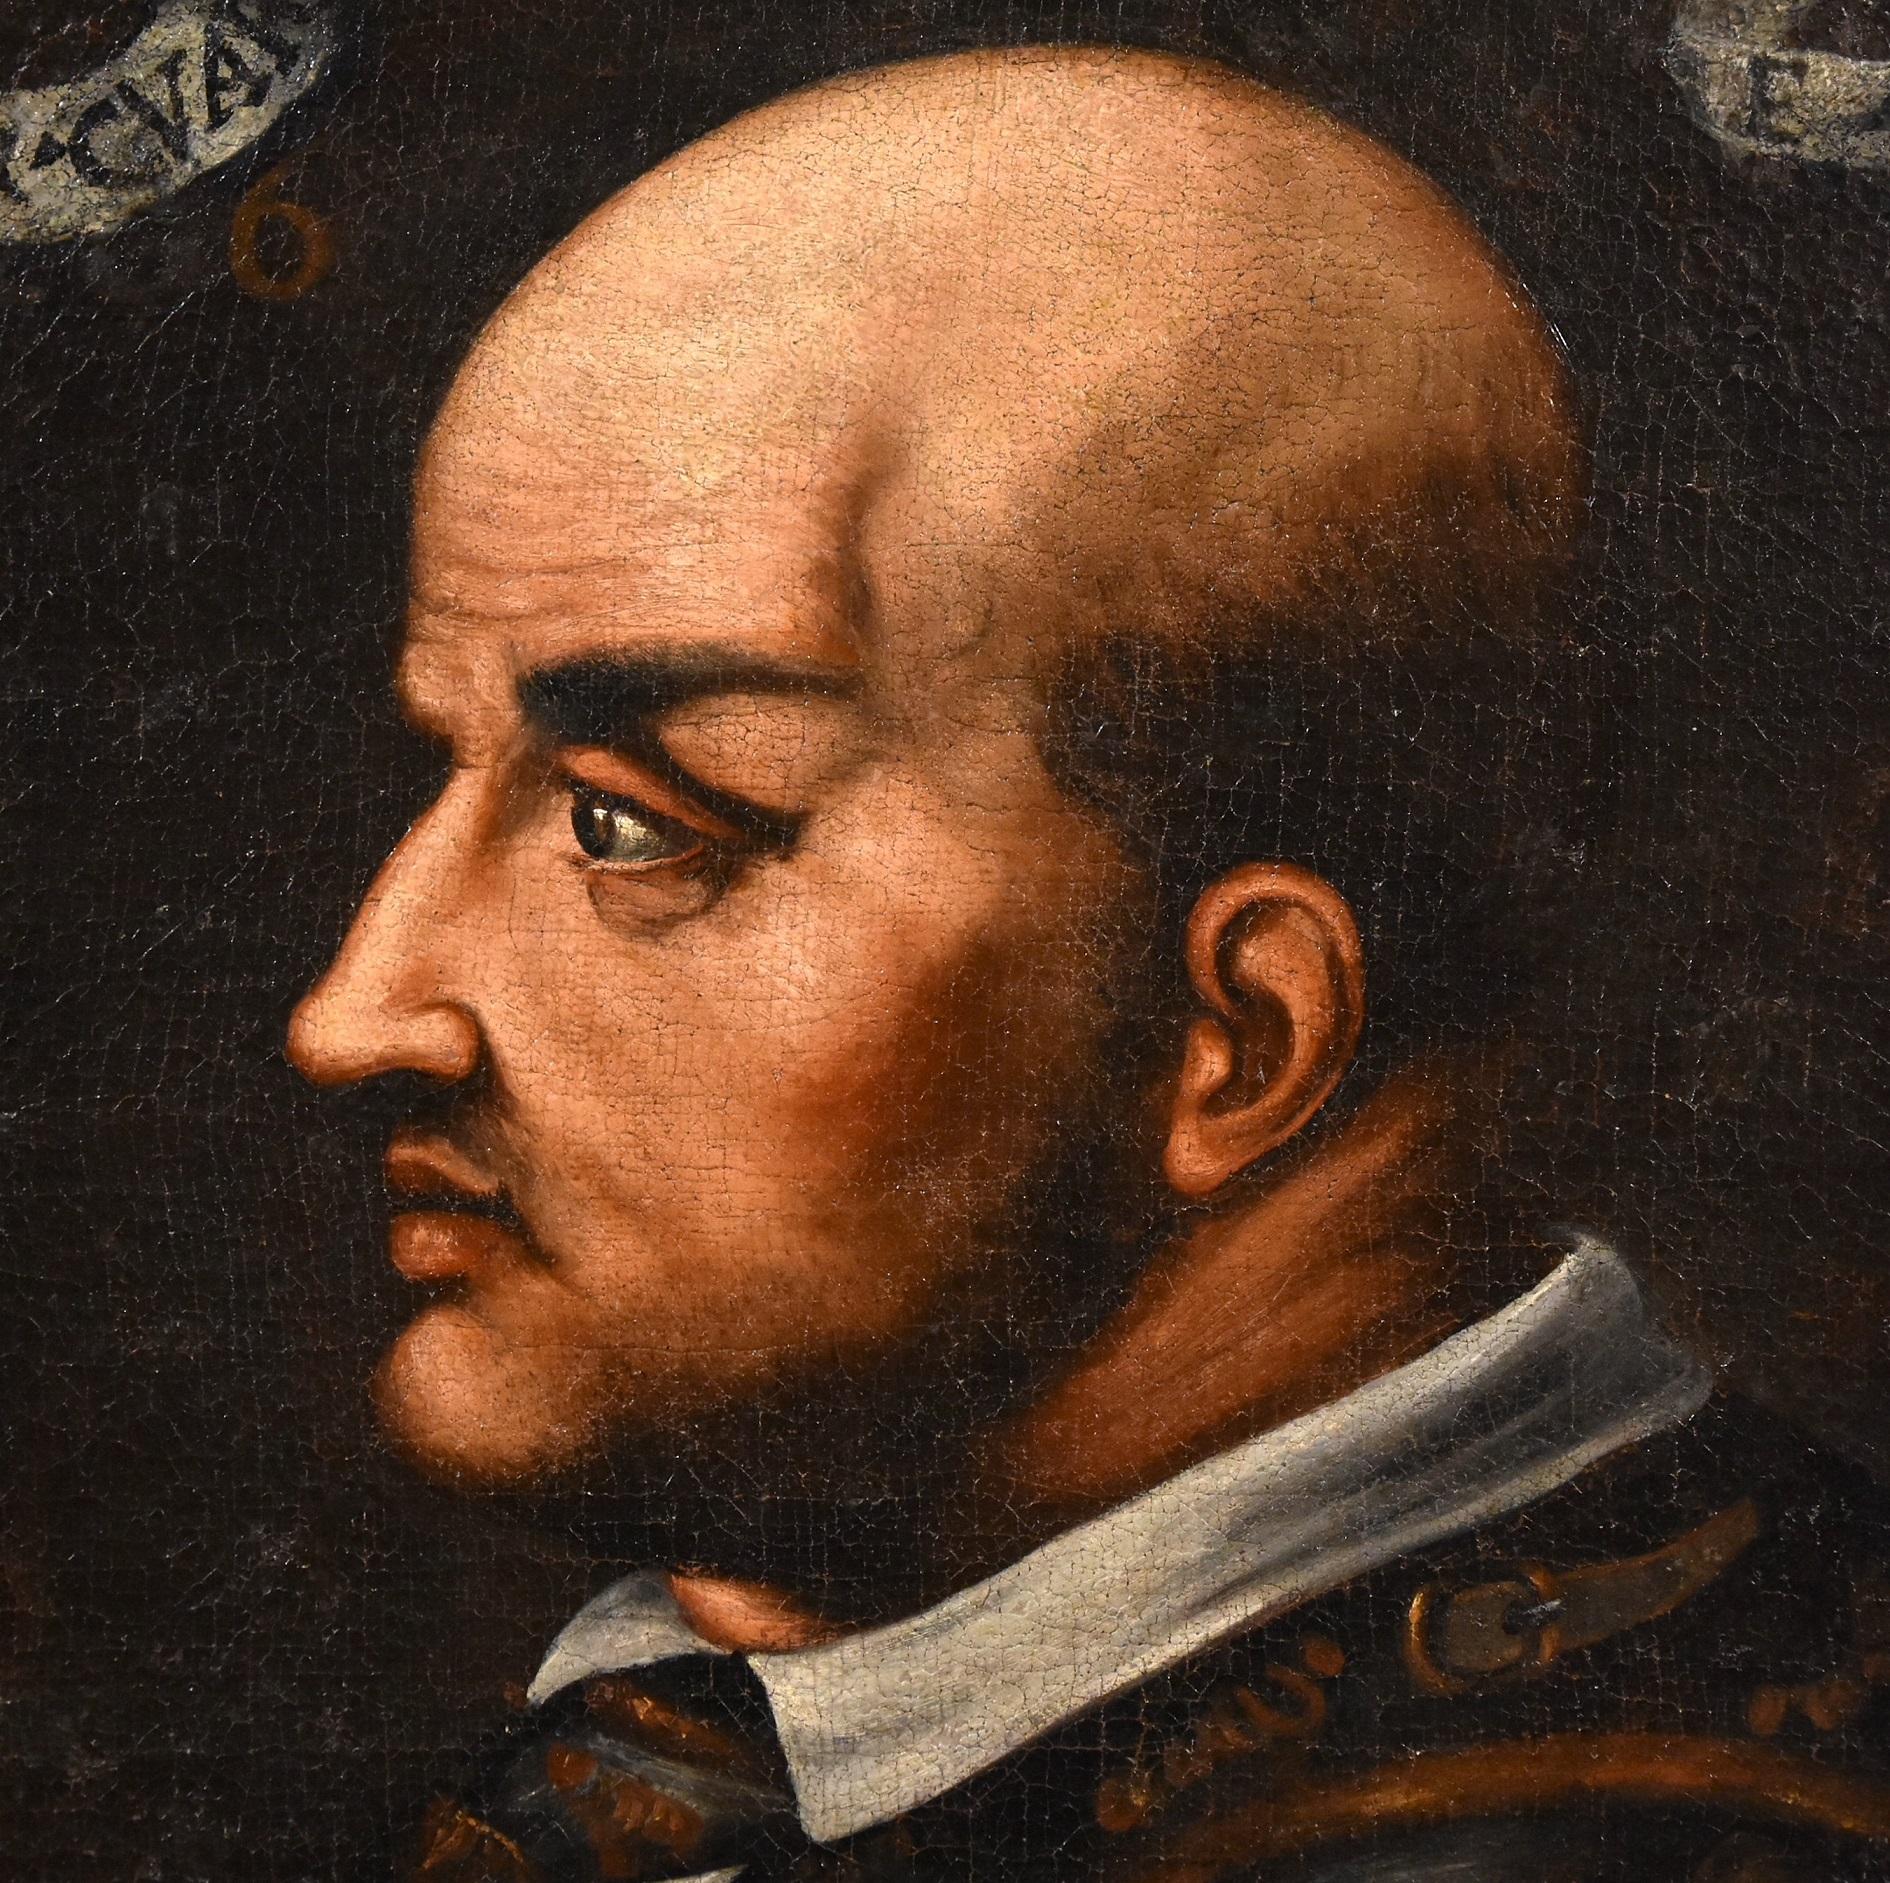 Portrait Paint Oil on canvas Old master 16/17th Century Italian Raffaello Art - Old Masters Painting by Tuscan painter active towards the end of the 16th century